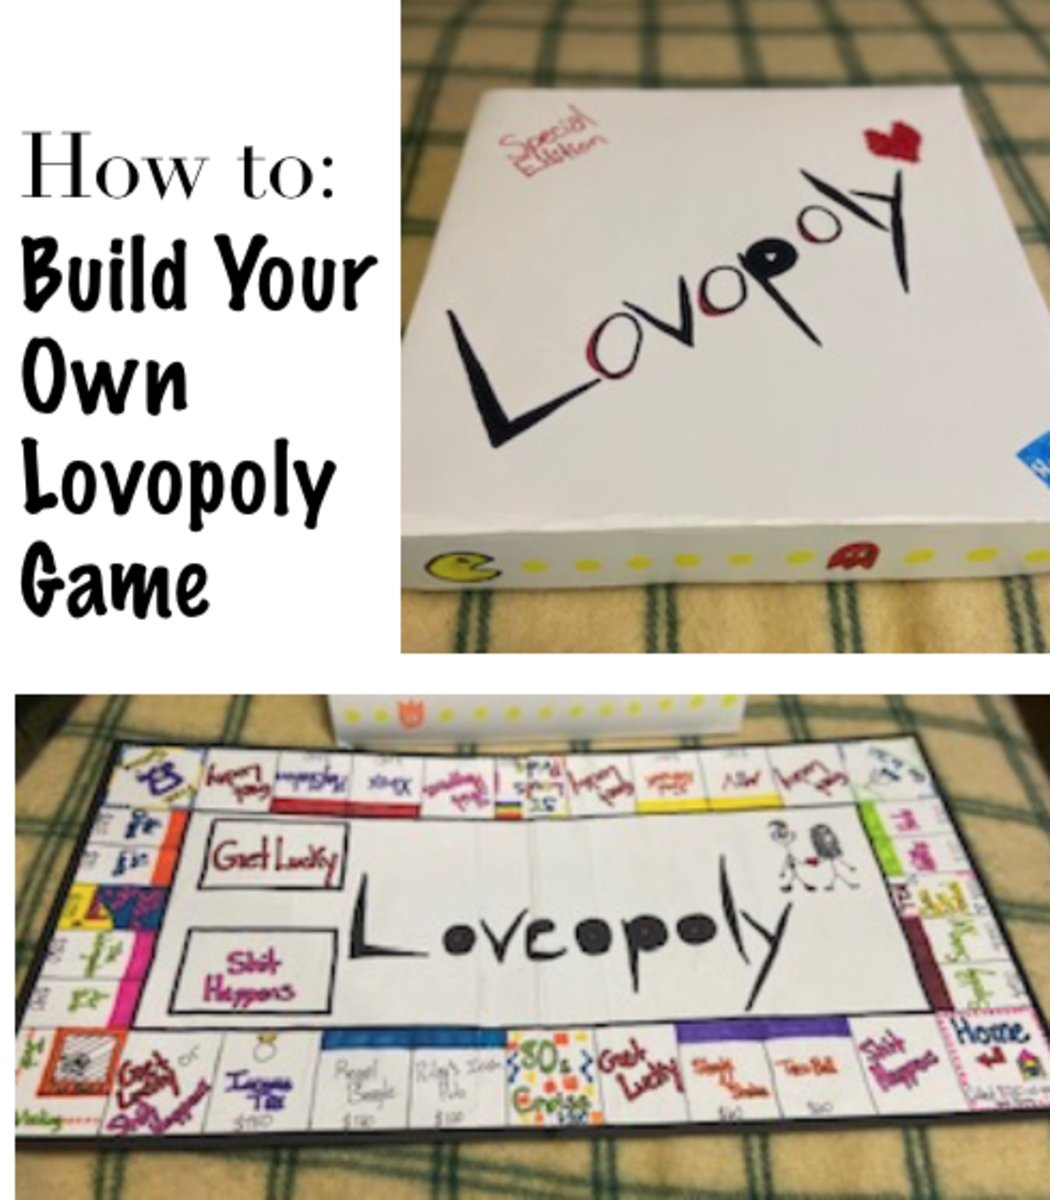 How To Build a Lovopoly Board Game